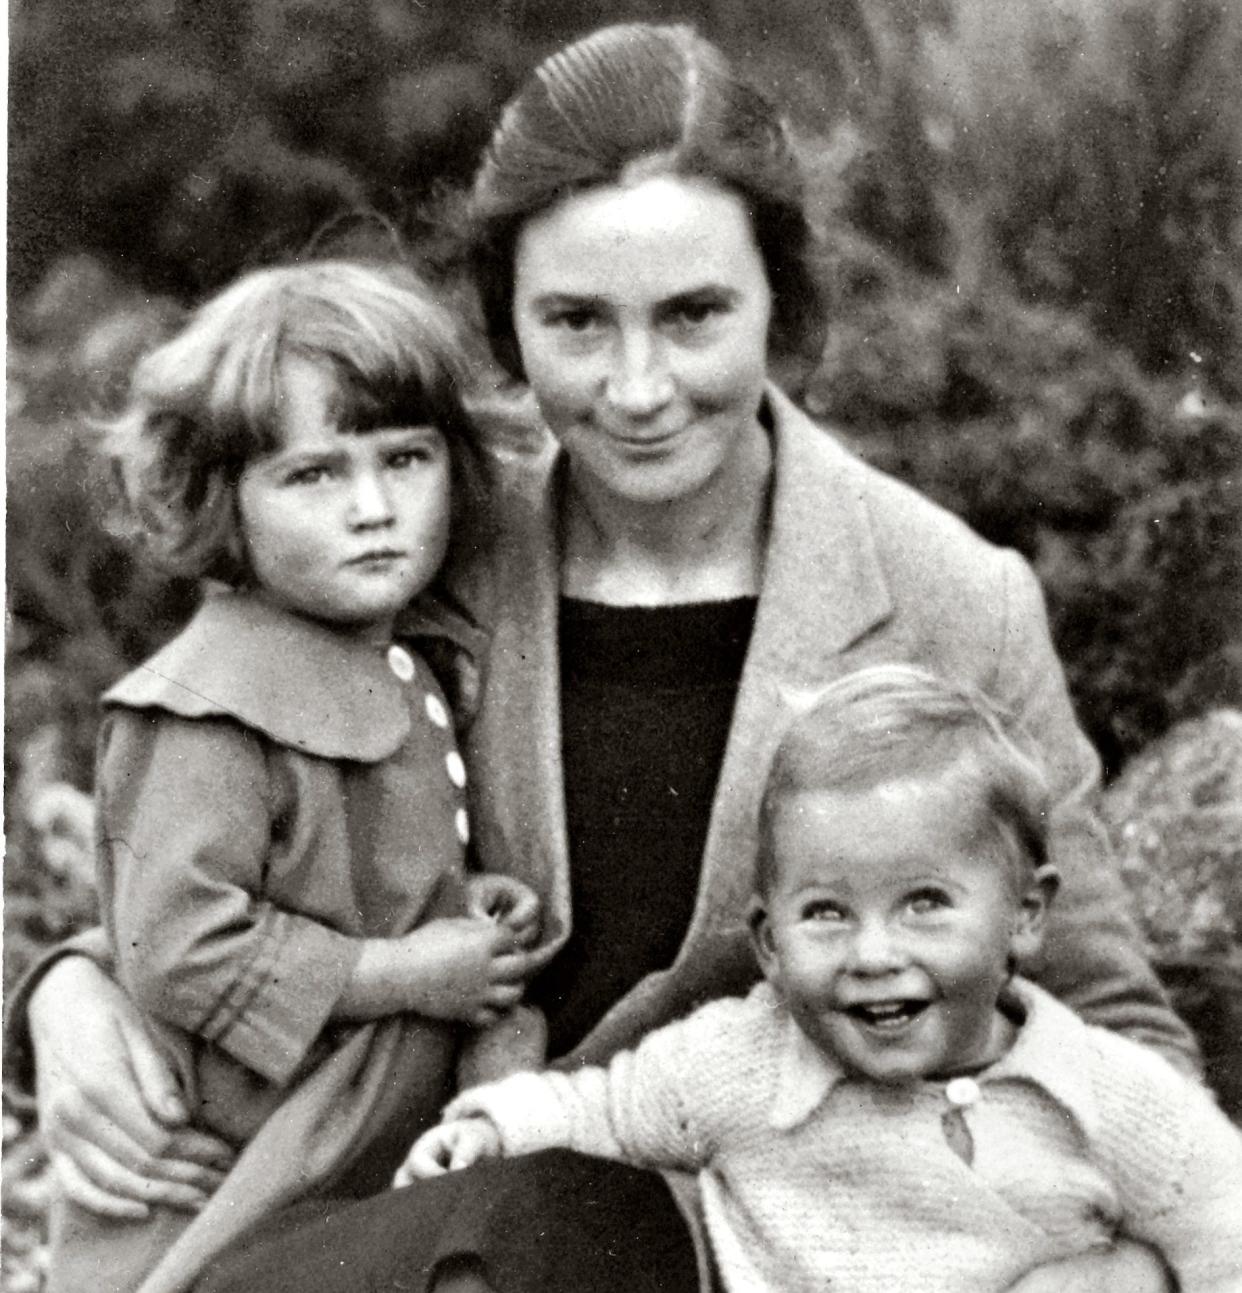 Roger Bannister aged around 18 months with mother Alice and sister Joyce, three, around 1930